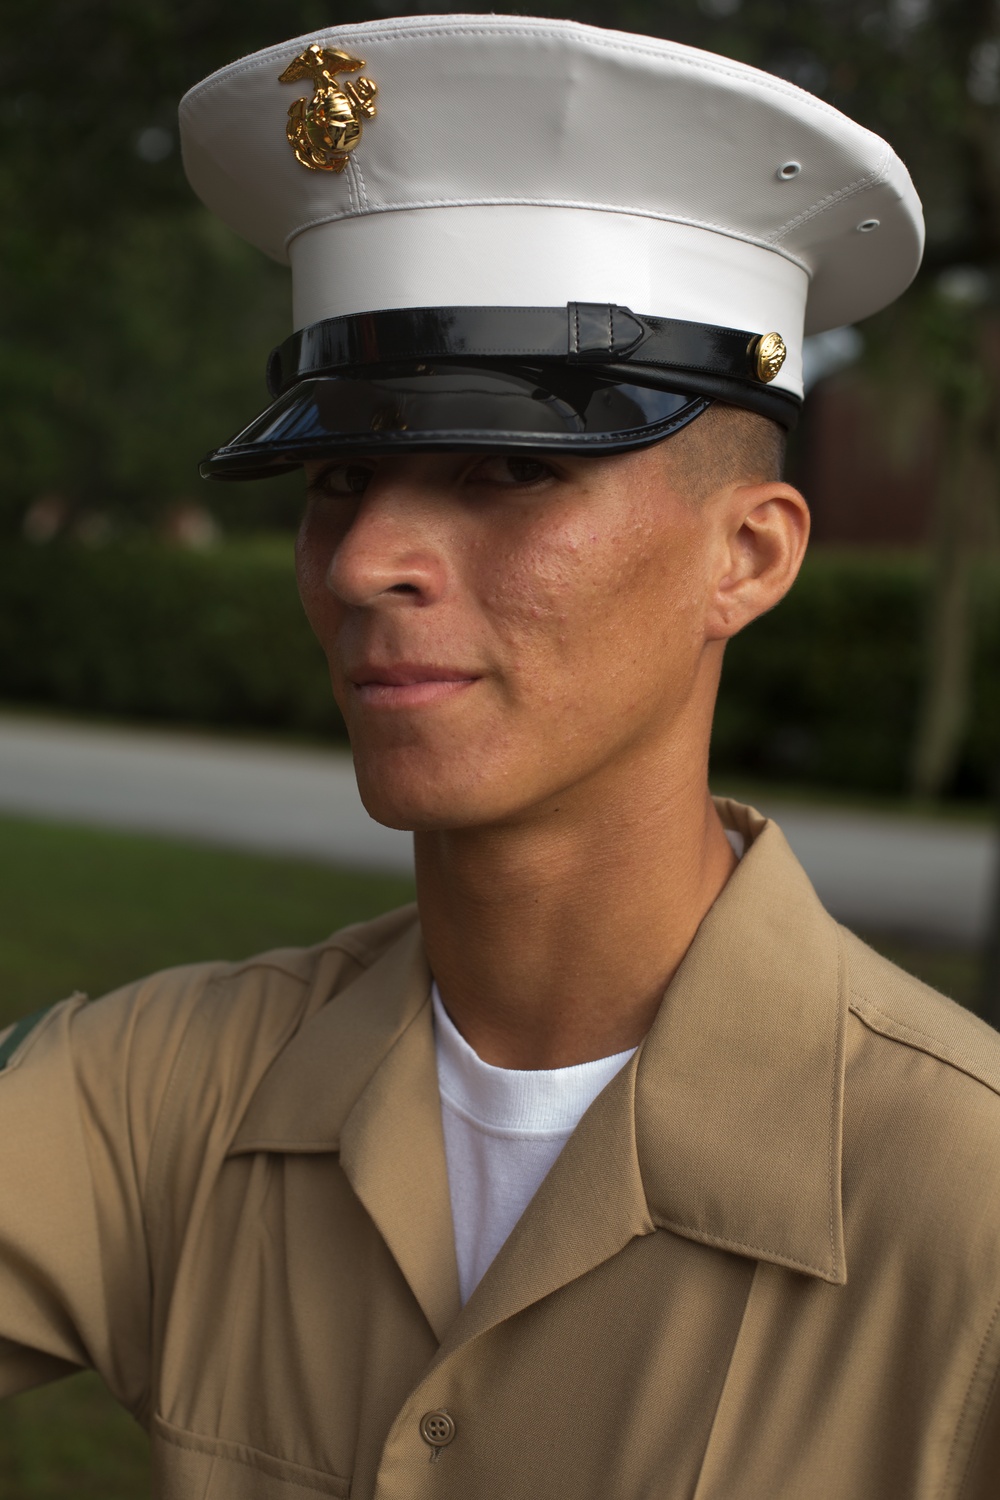 Pfc. Selvin Y. Rivera Vasquez, honor graduate for Platoon 2069, Fox Company, 2nd Recruit Training Battalion, graduated boot camp Aug. 16, 2016. Rivera Vasquez is from Glen Cove, N.Y. (Photos by Lance Cpl. Carlin Warren)